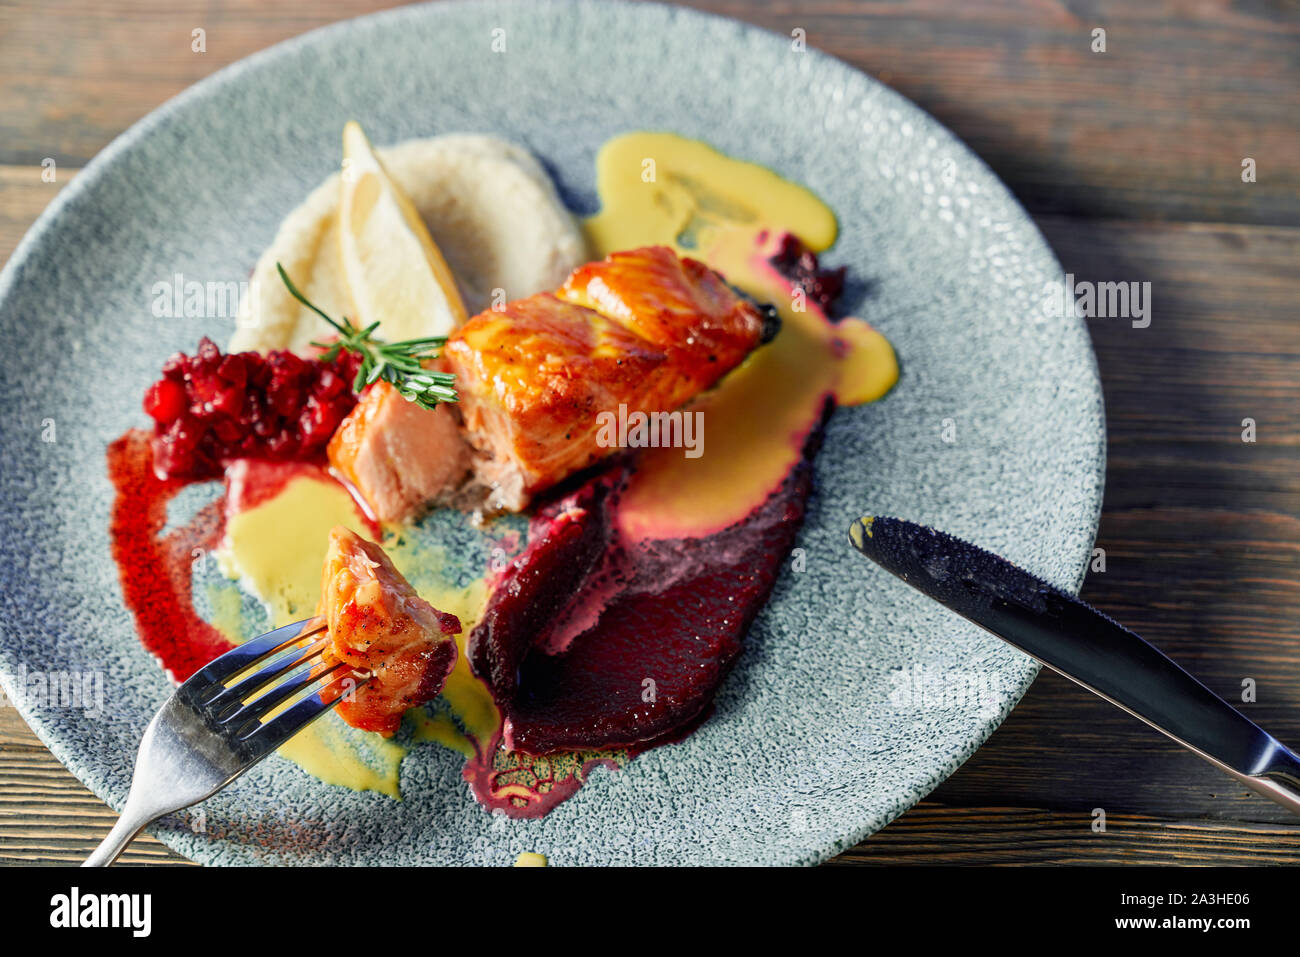 View from above of delicious grilled fish served with fruit garnish on plate. Fork with piece of meat and knife. Tasty meal with sauce and lemon. Concept of diet and vitamin. Stock Photo